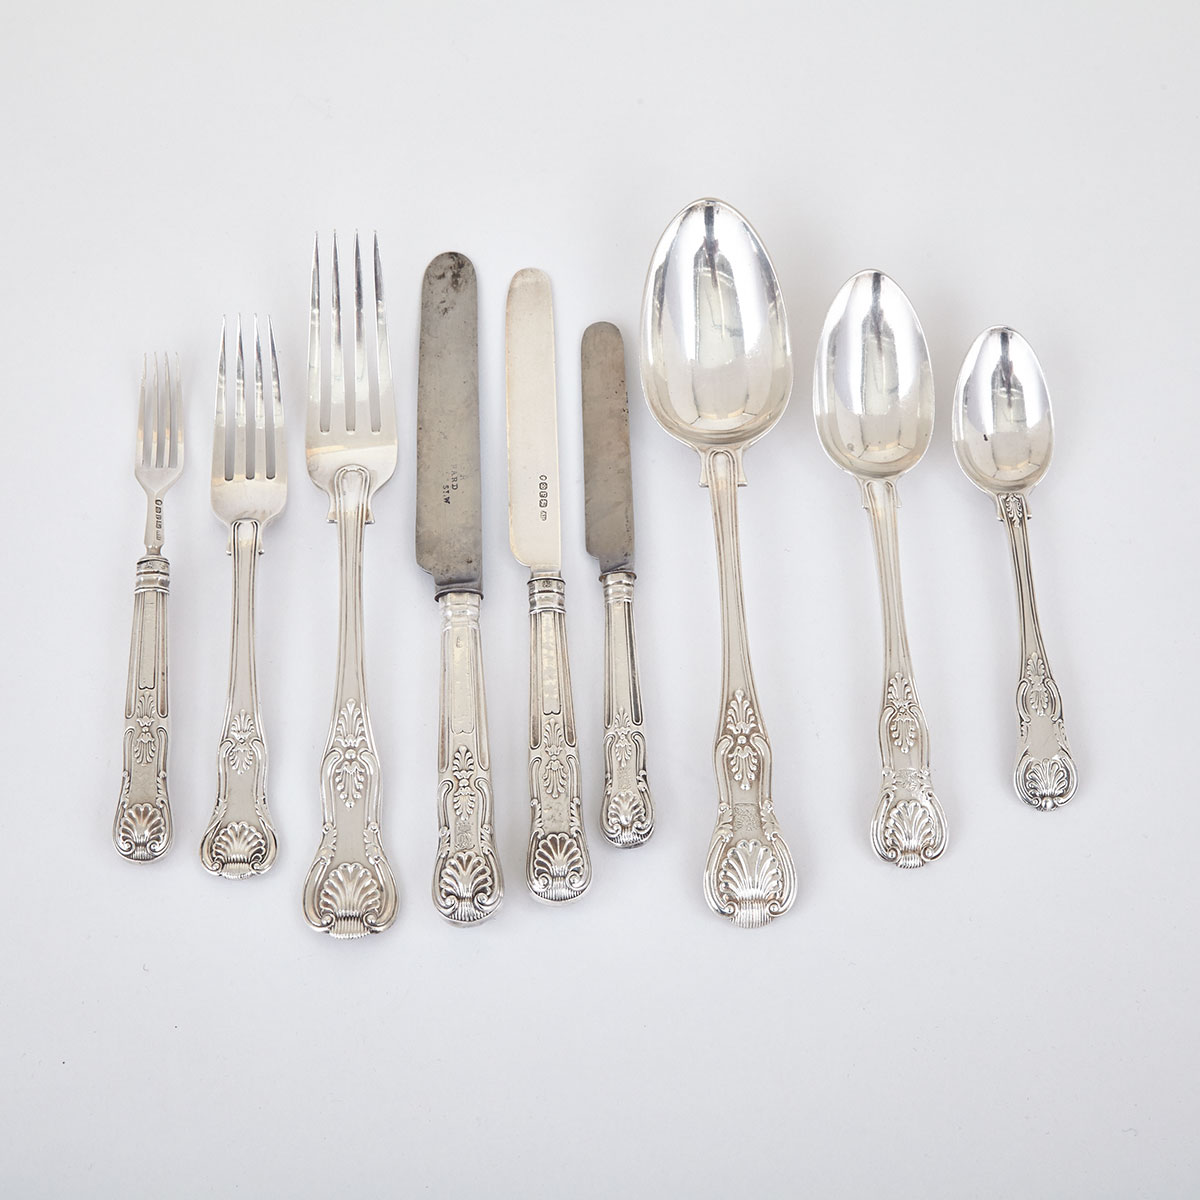 Assembled Georgian and Victorian Silver Kings Pattern Flatware Service, 19th century